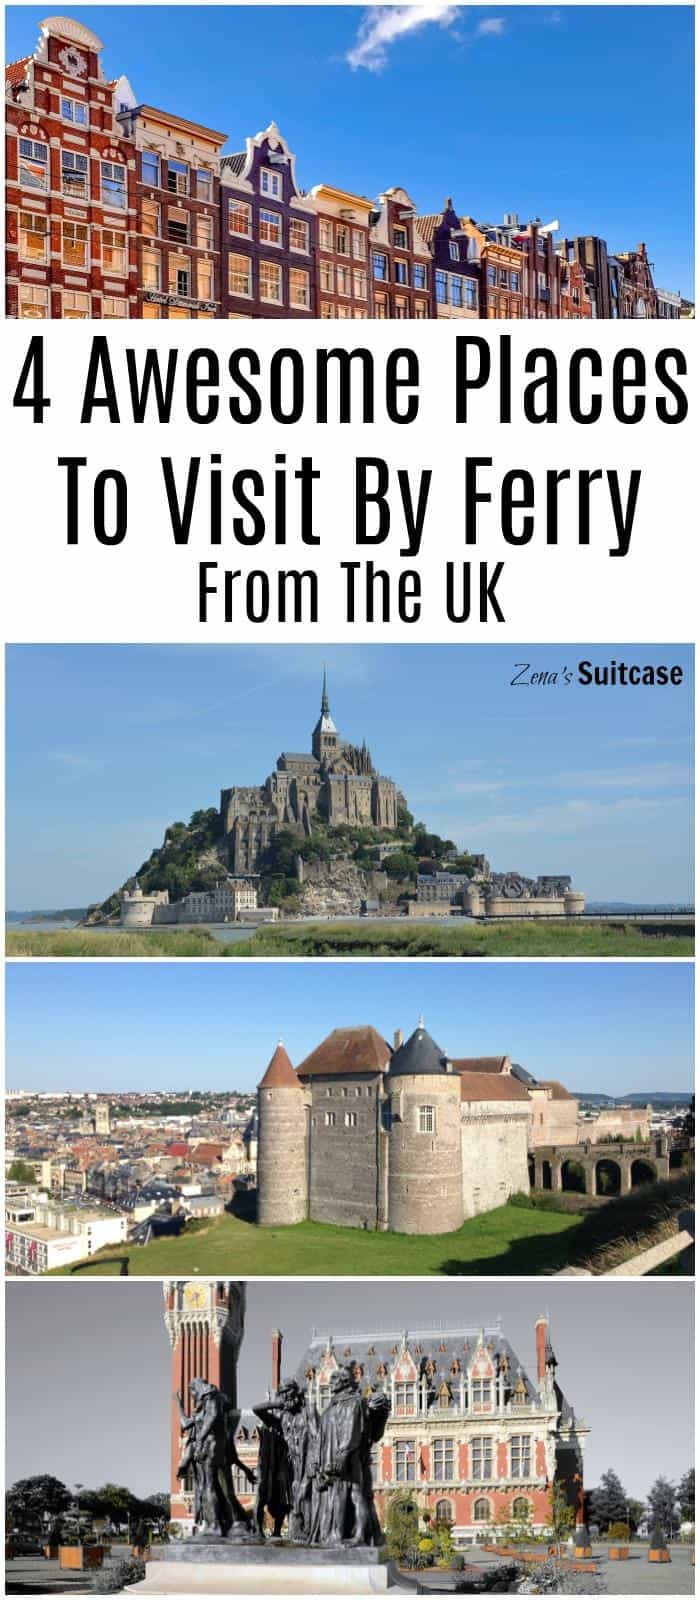 4 Awesome places to visit be ferry from the UK. Visiting Europe by ferry is an excellent option for travellers and can be the perfect start to a day trip or a European road trip. Find out more about taking the ferry to Calais, Dunkirk, Dieppe and Amsterdam here